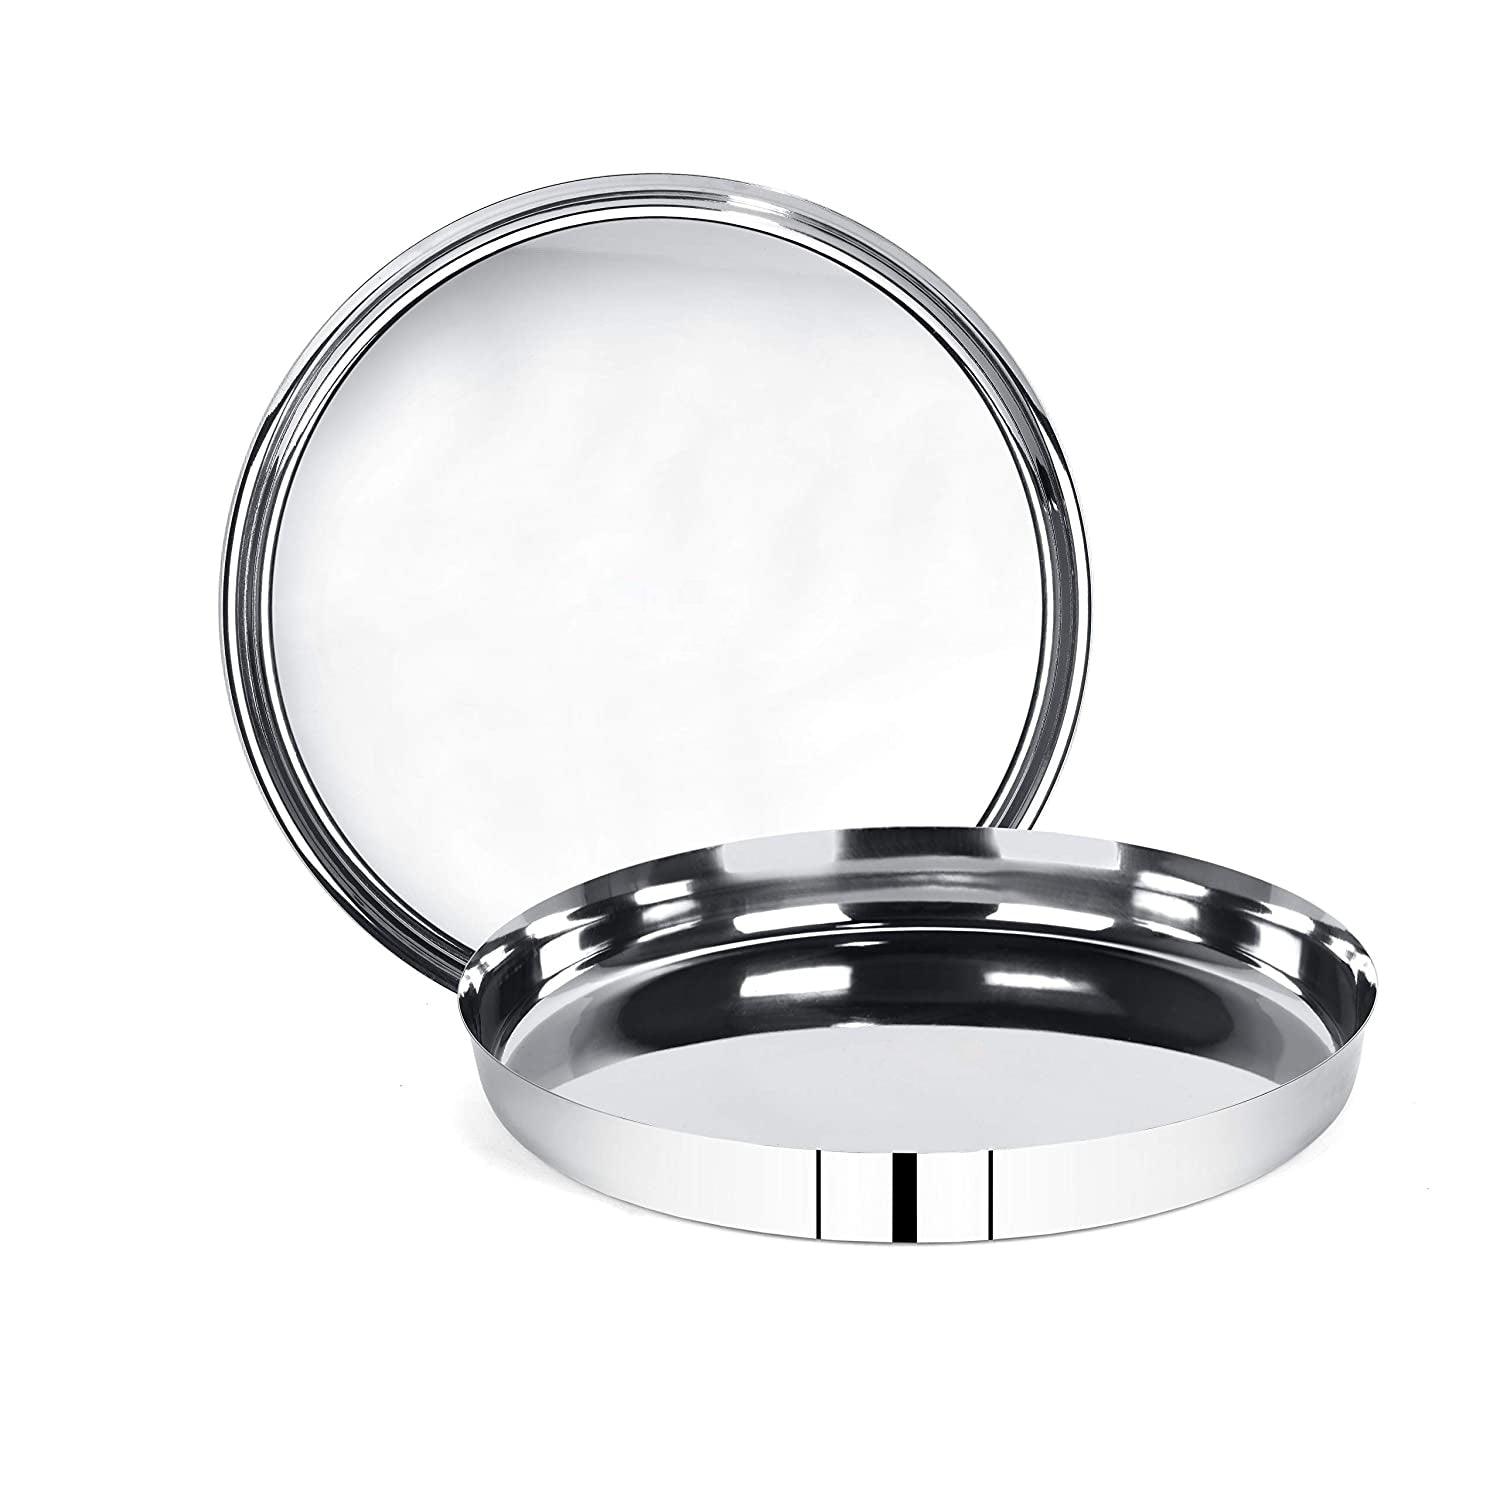 Stainless Steel Traditional Dinnerware Plate/Thali with Mirror Finish (Silver) - Walgrow.com